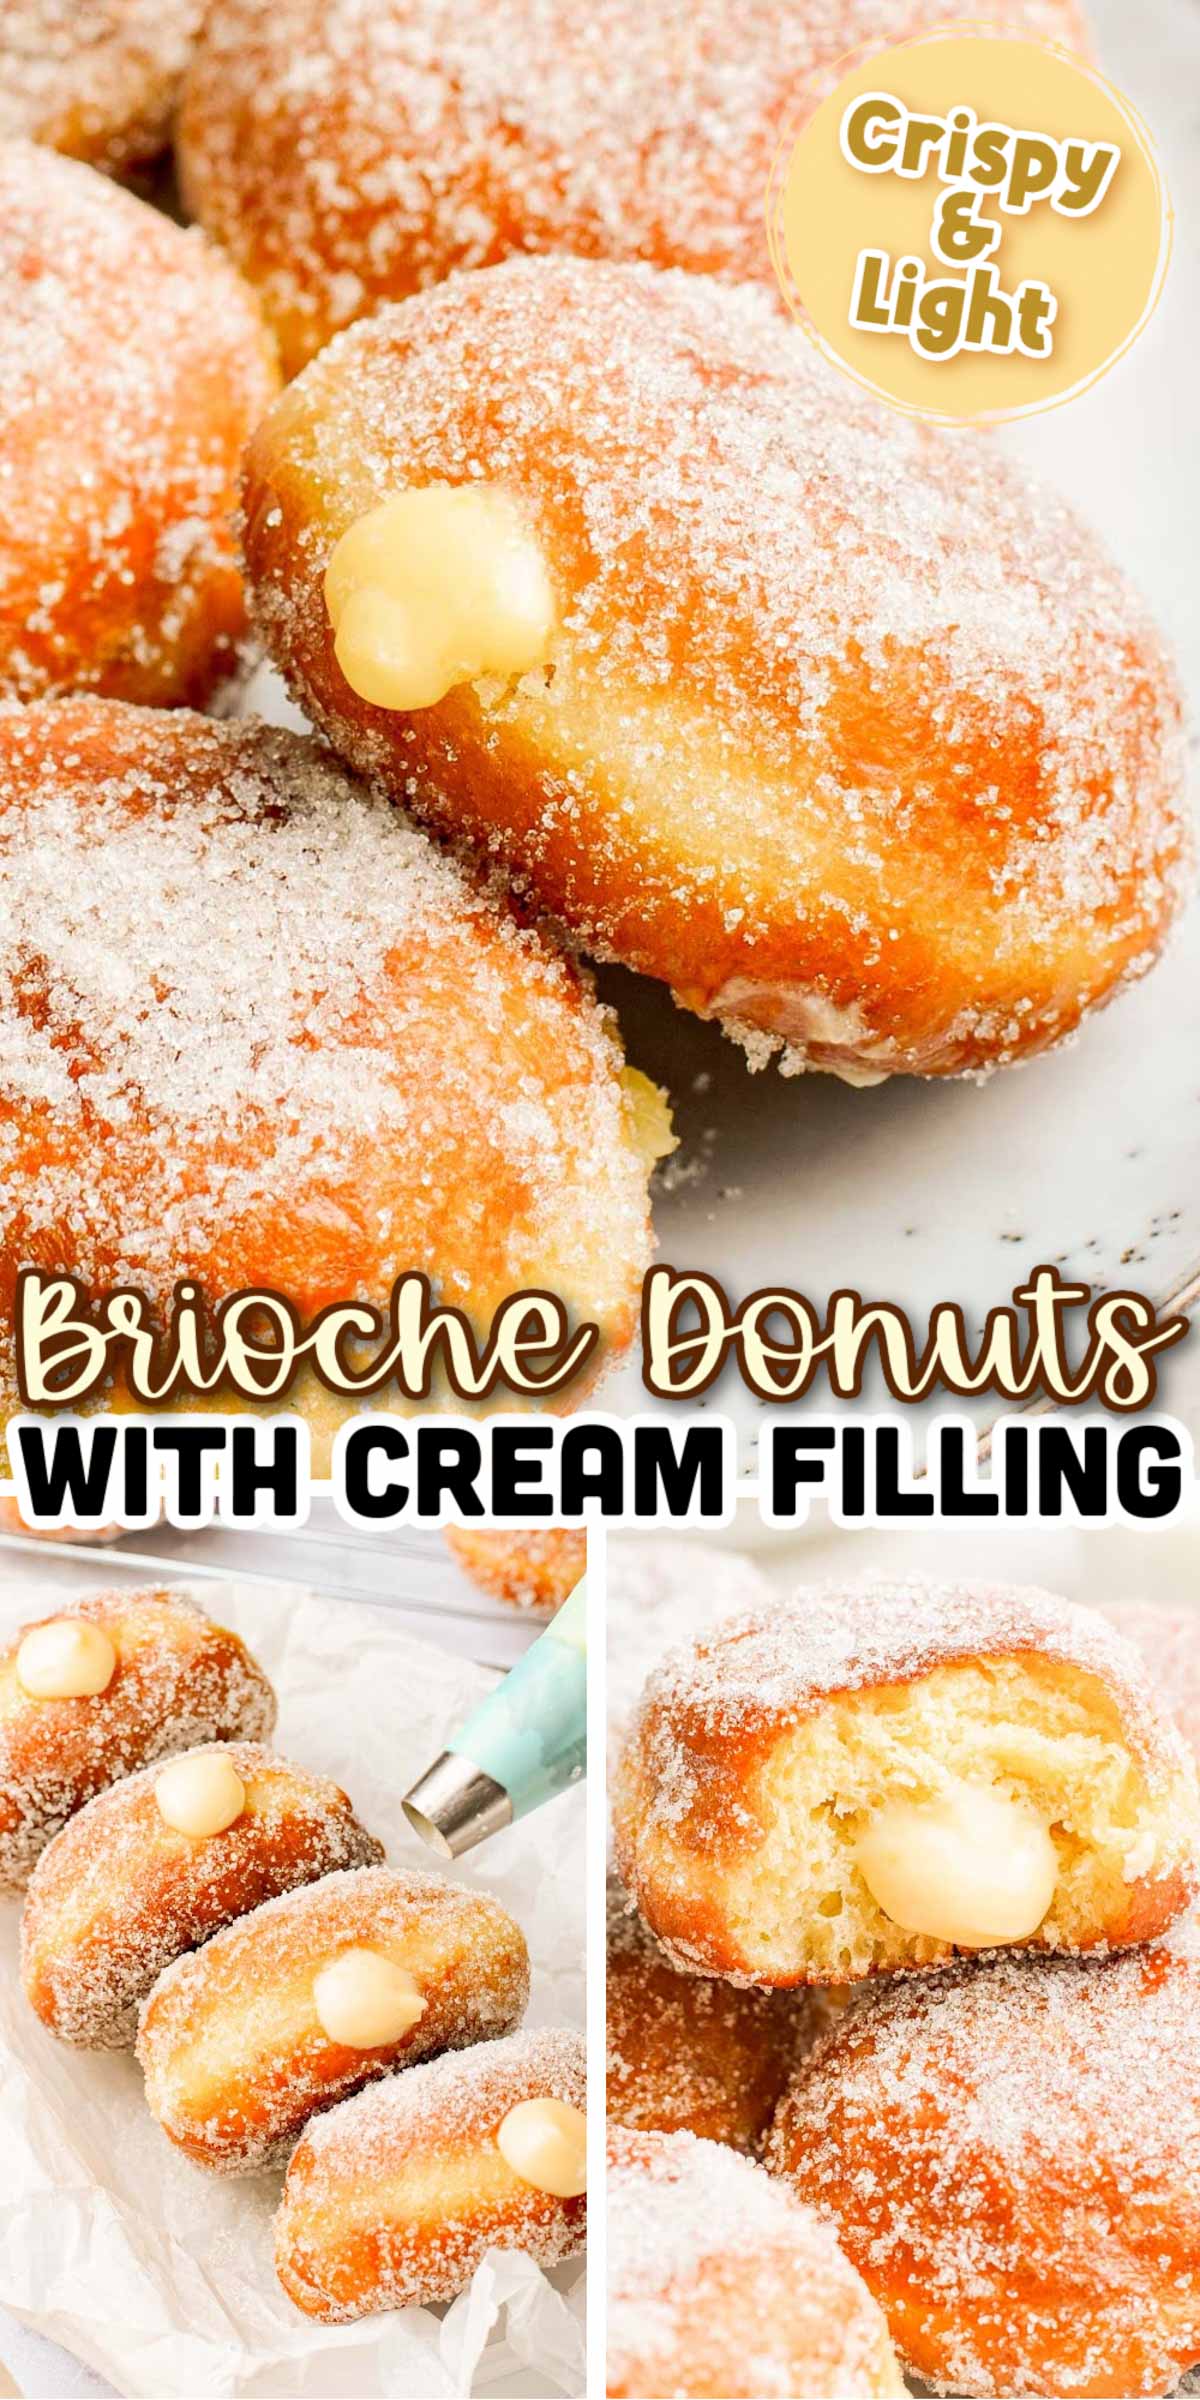 Brioche Donuts are both crispy and light and filled with smooth vanilla pastry cream making them the ultimate breakfast confection! This from-scratch recipe includes step-by-step instructions making homemade donuts easier than ever! via @sugarandsoulco